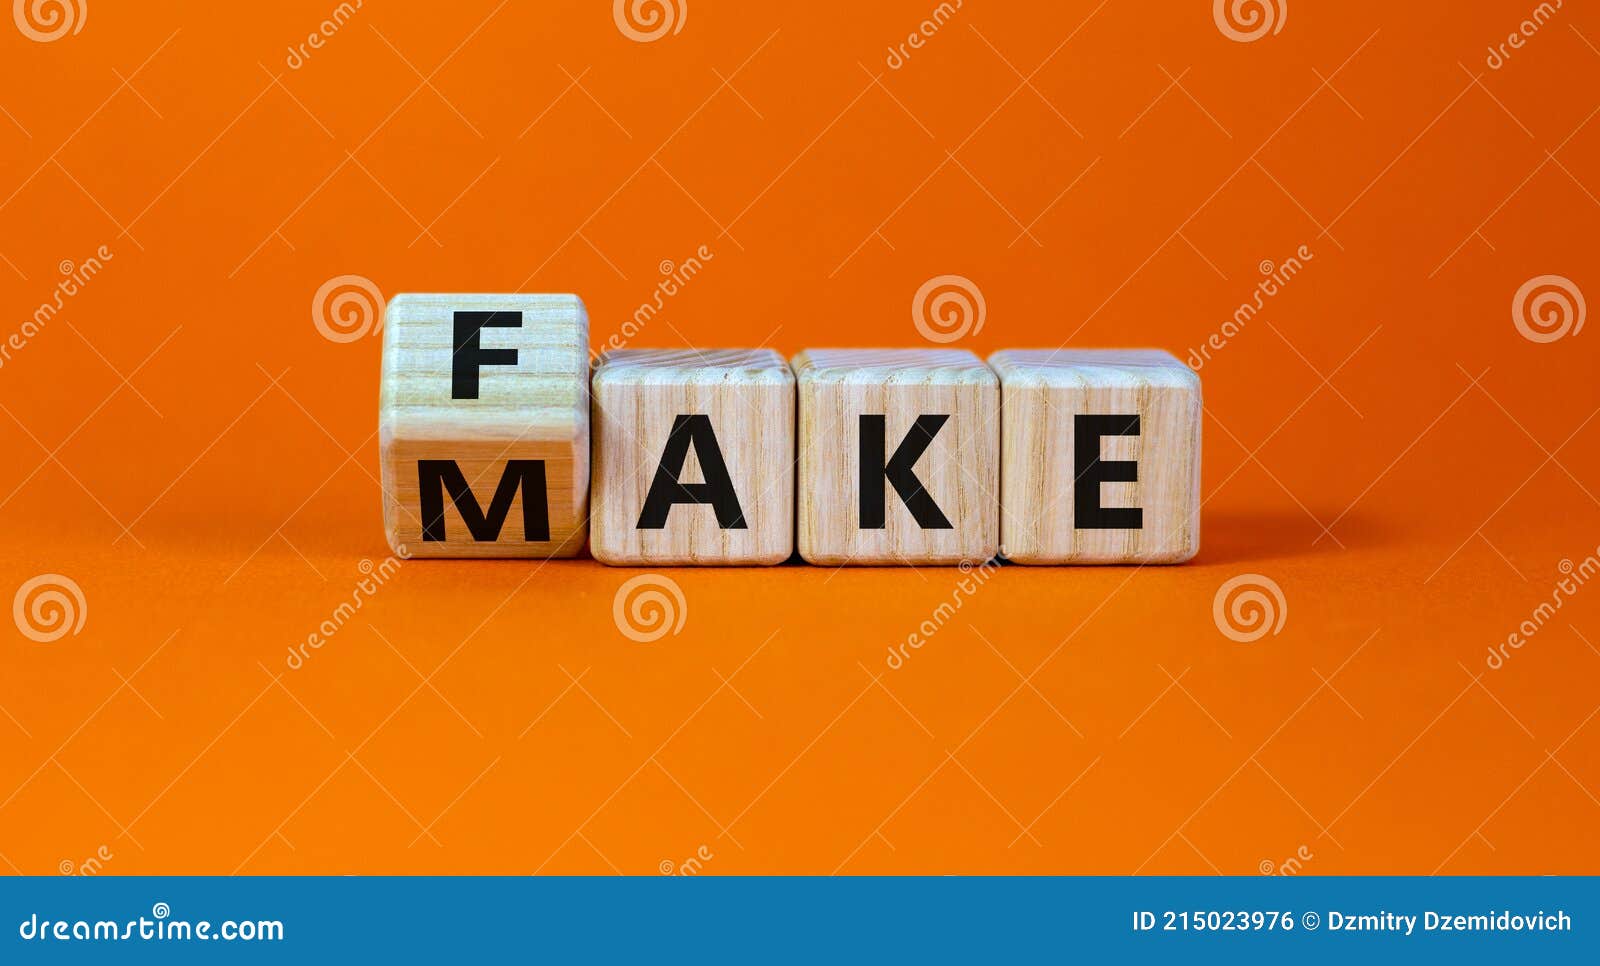 fake it until you make it . turned a cube and changed the word `fake` to `make`. beautiful orange background. business,